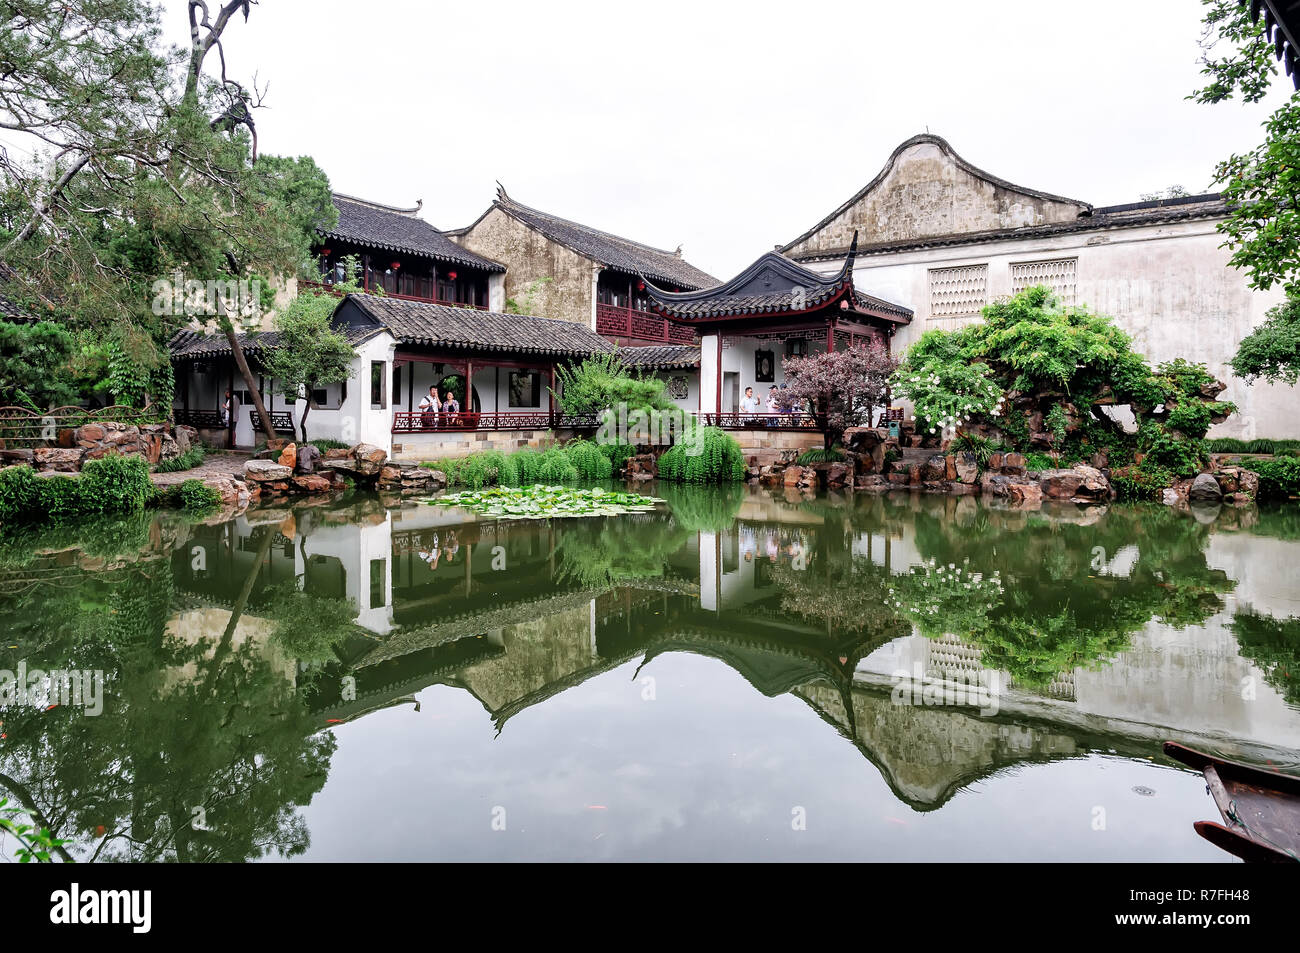 Suzhou, China - August 12, 2011: View The Master of the Nets Garden in Suzhou. This is among the finest gardens in China Stock Photo